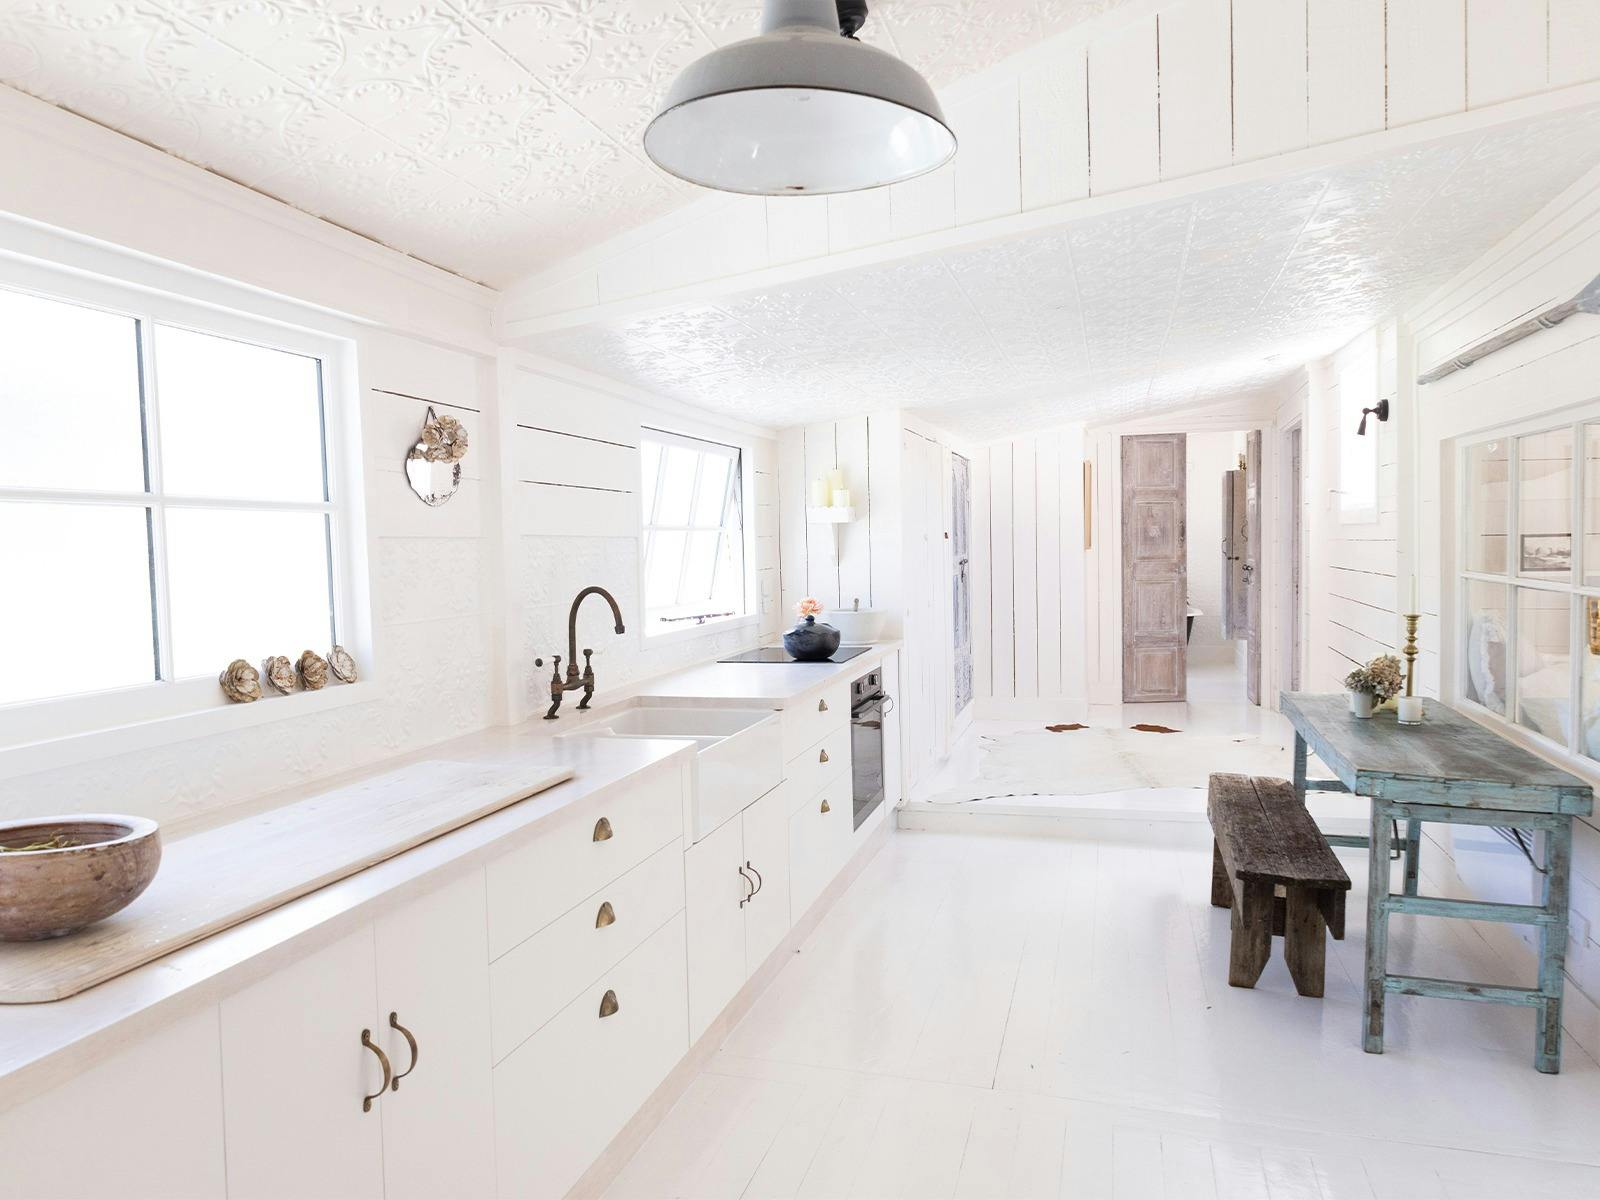 Looking down a long white gallery kitchen with pressed tin ceilings and wooden floors